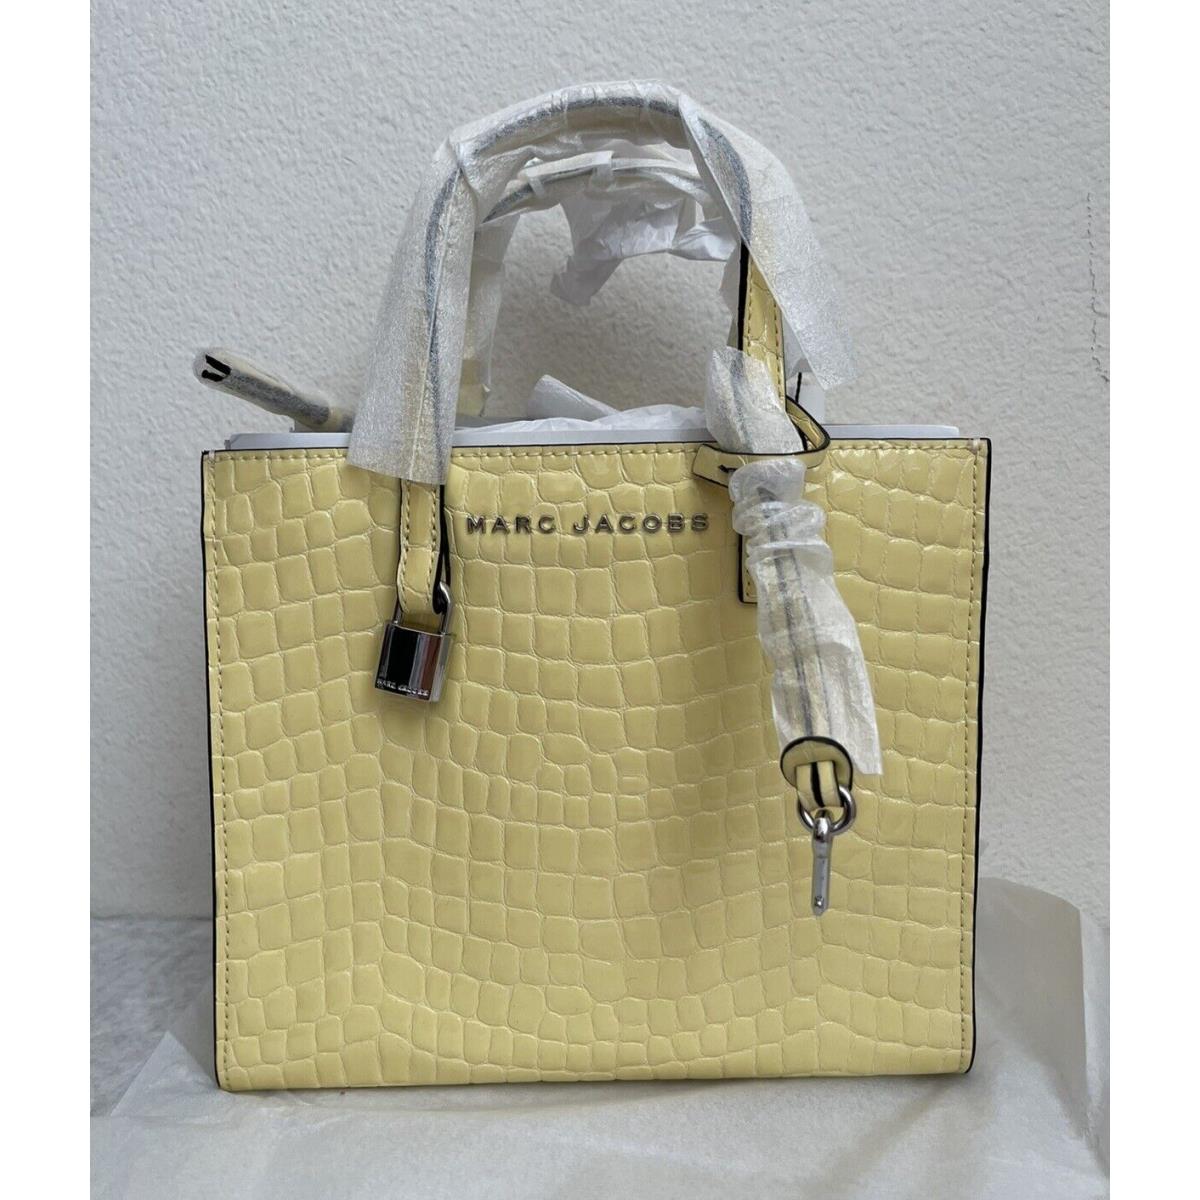 Marc Jacobs Mini Grind Embossed Leather Tote Satchel Bag French Vanilla